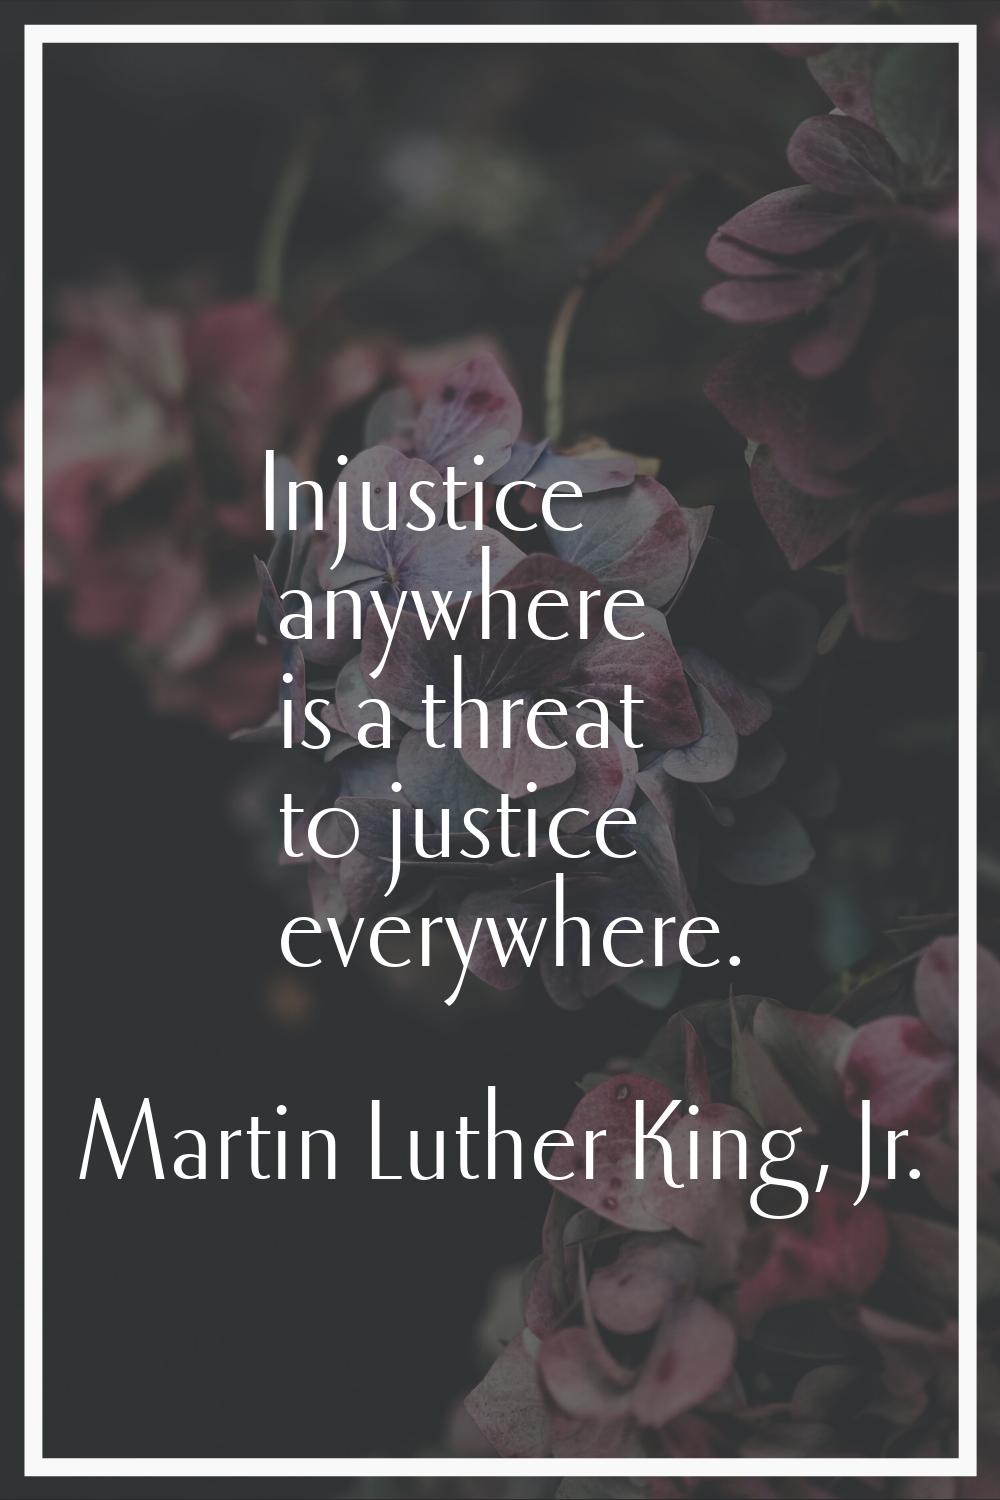 Injustice anywhere is a threat to justice everywhere.